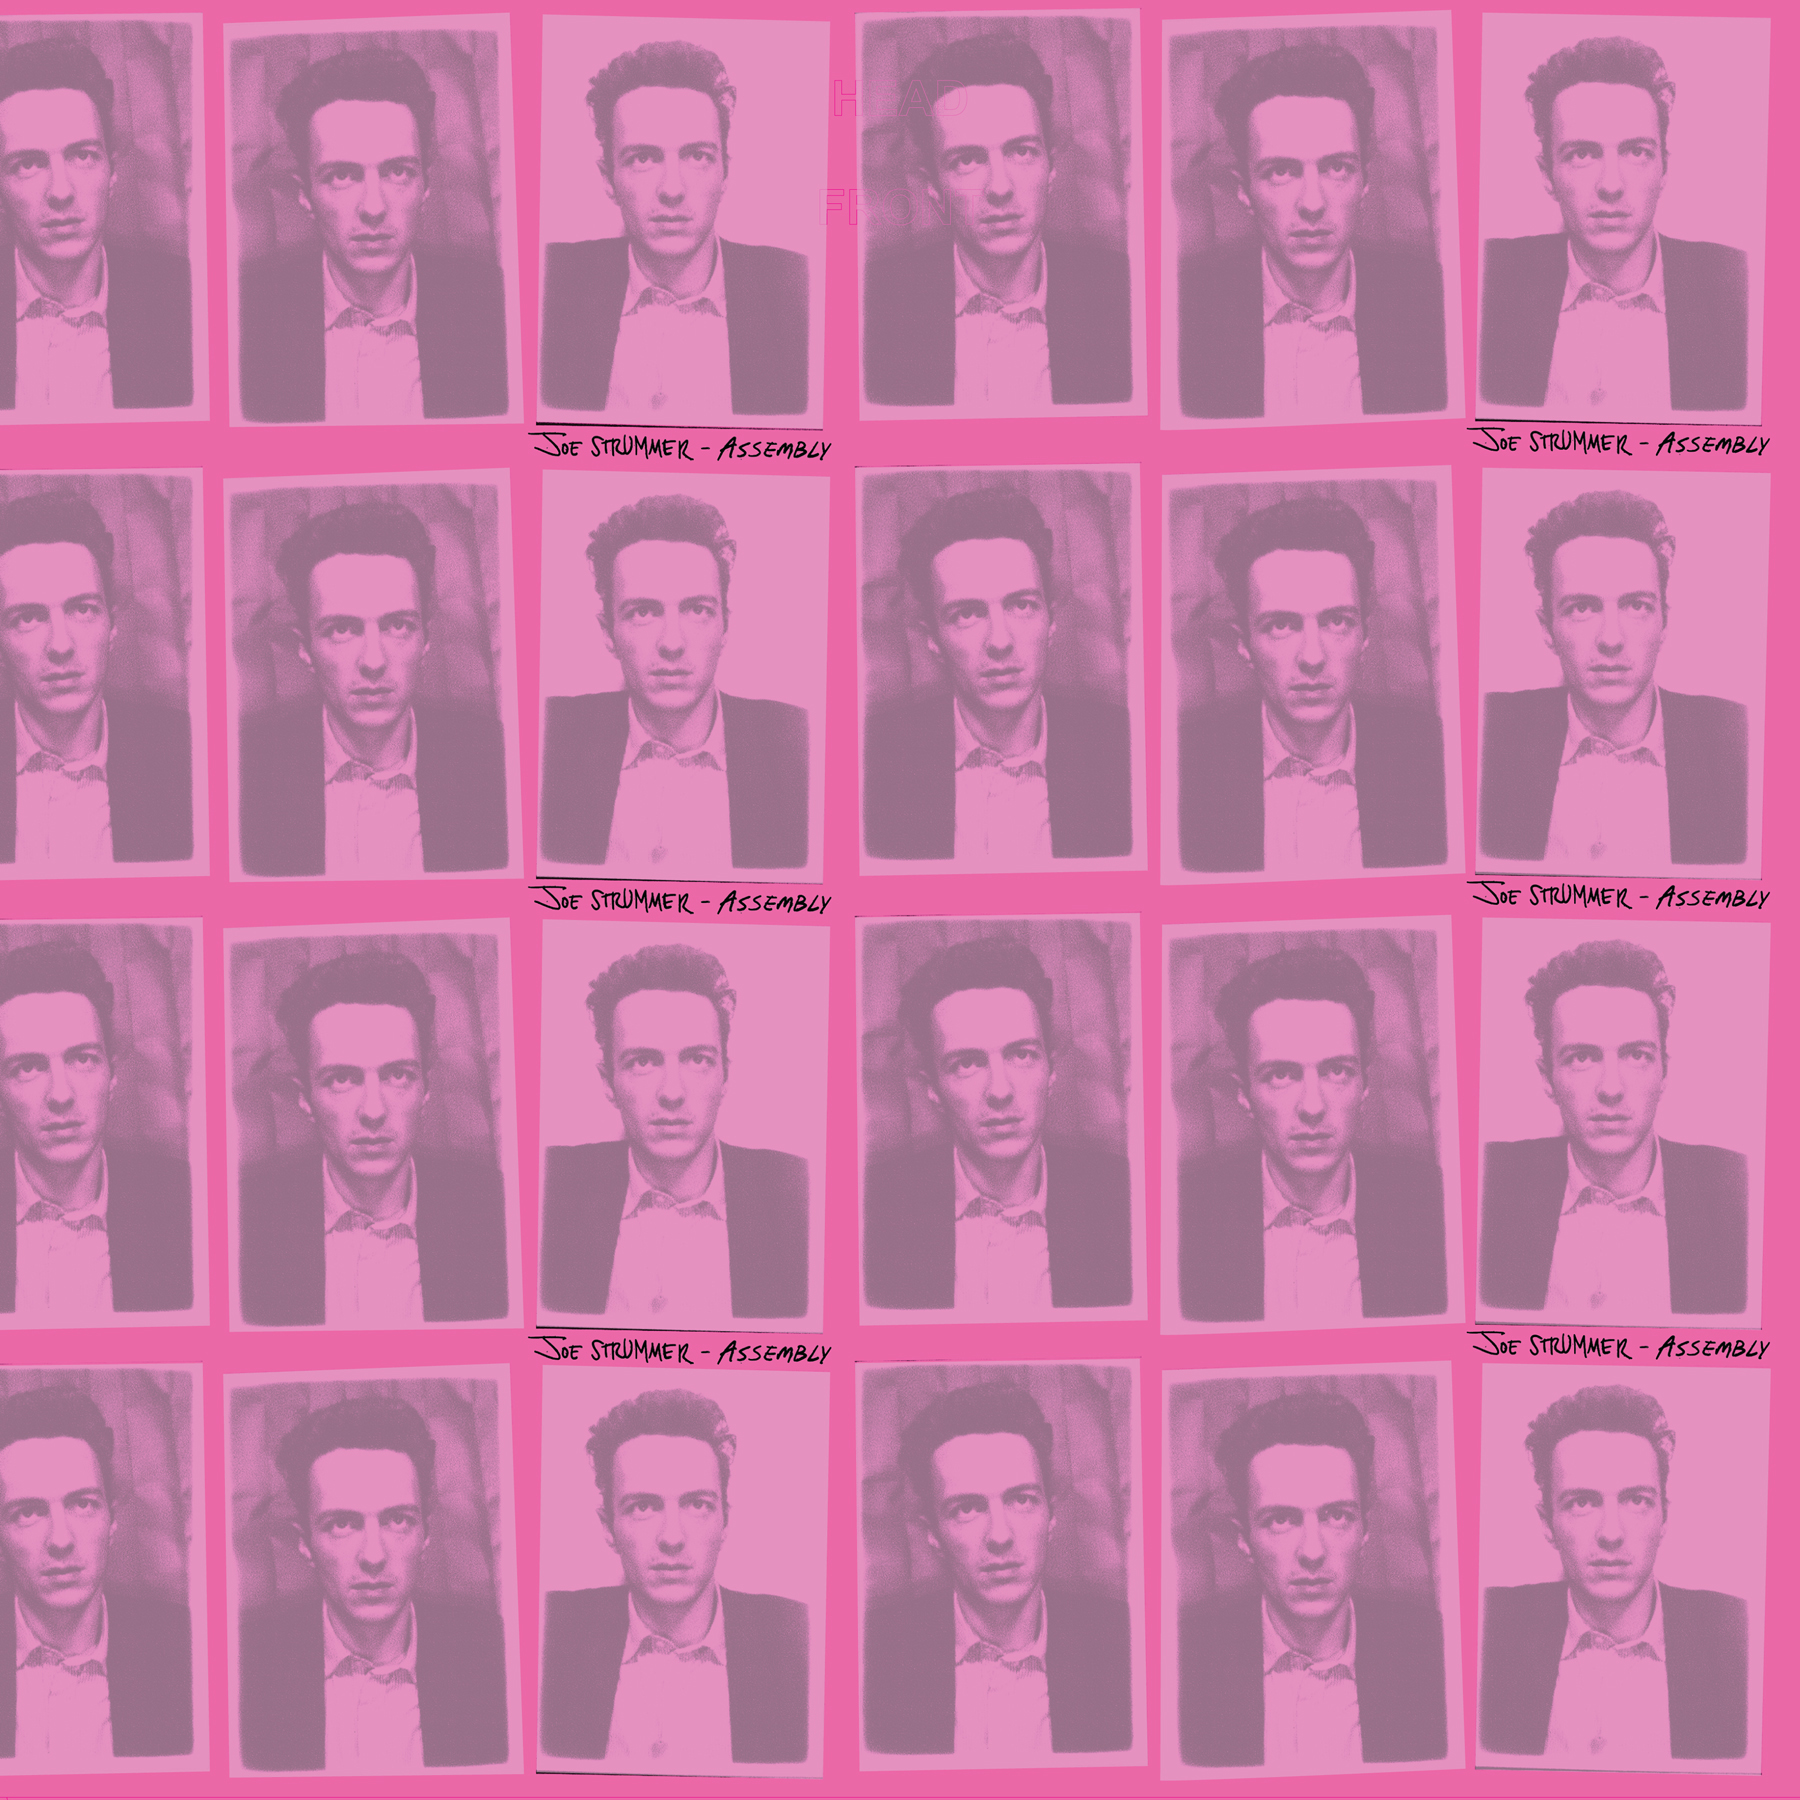 photo of a limited edition of Joe Strummer's 2021 album "Assembly," with a pink cover.